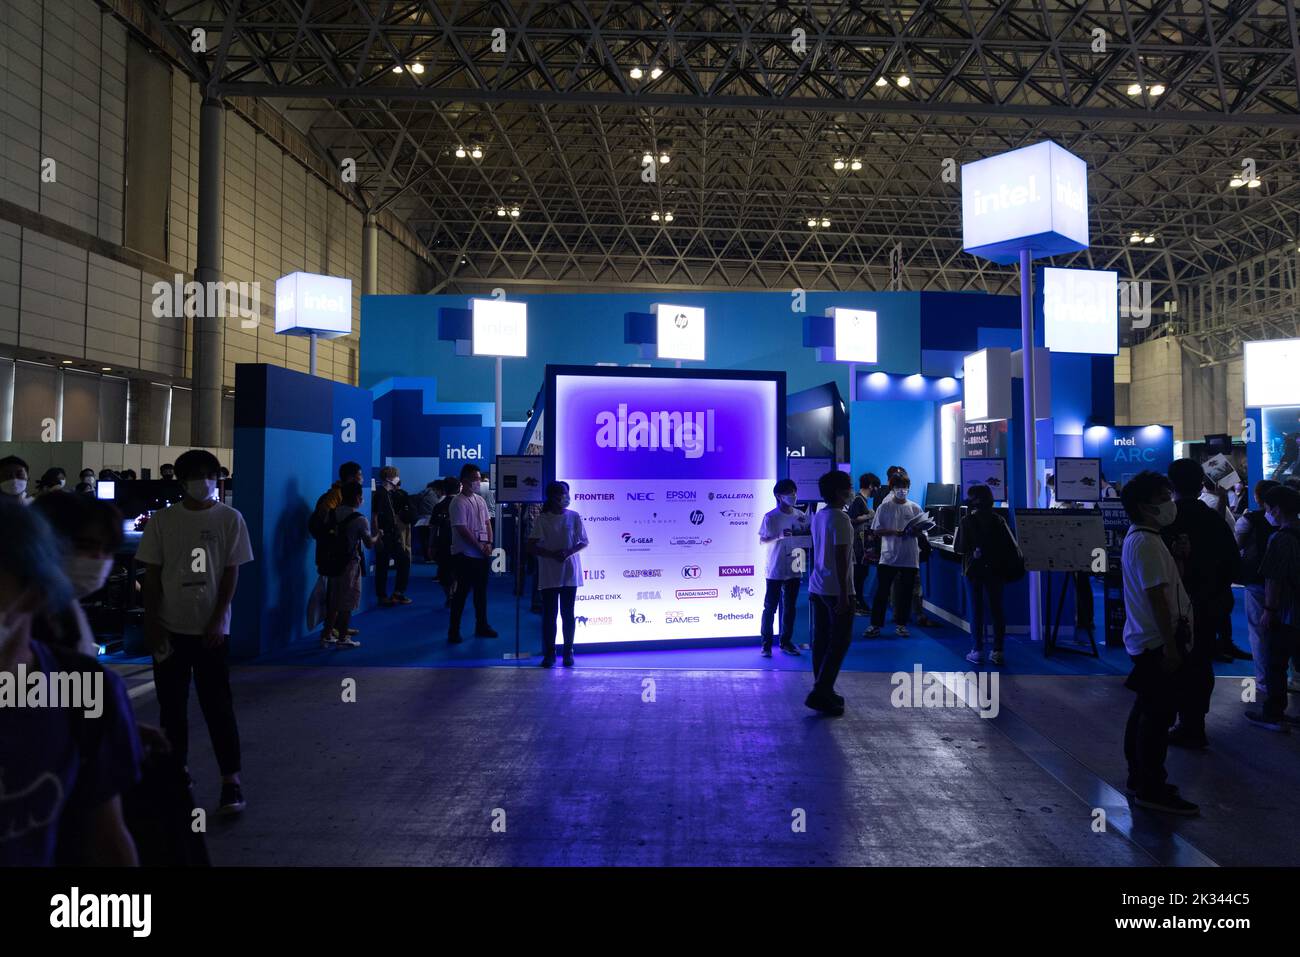 Intel (semiconductor manufacturing company) exhibition booth at Tokyo Game Show 2022. After a two years break forced by the Covid-19 pandemic, the Tokyo Game Show returned to Makuhari Messe in Chiba, Japan. Stock Photo